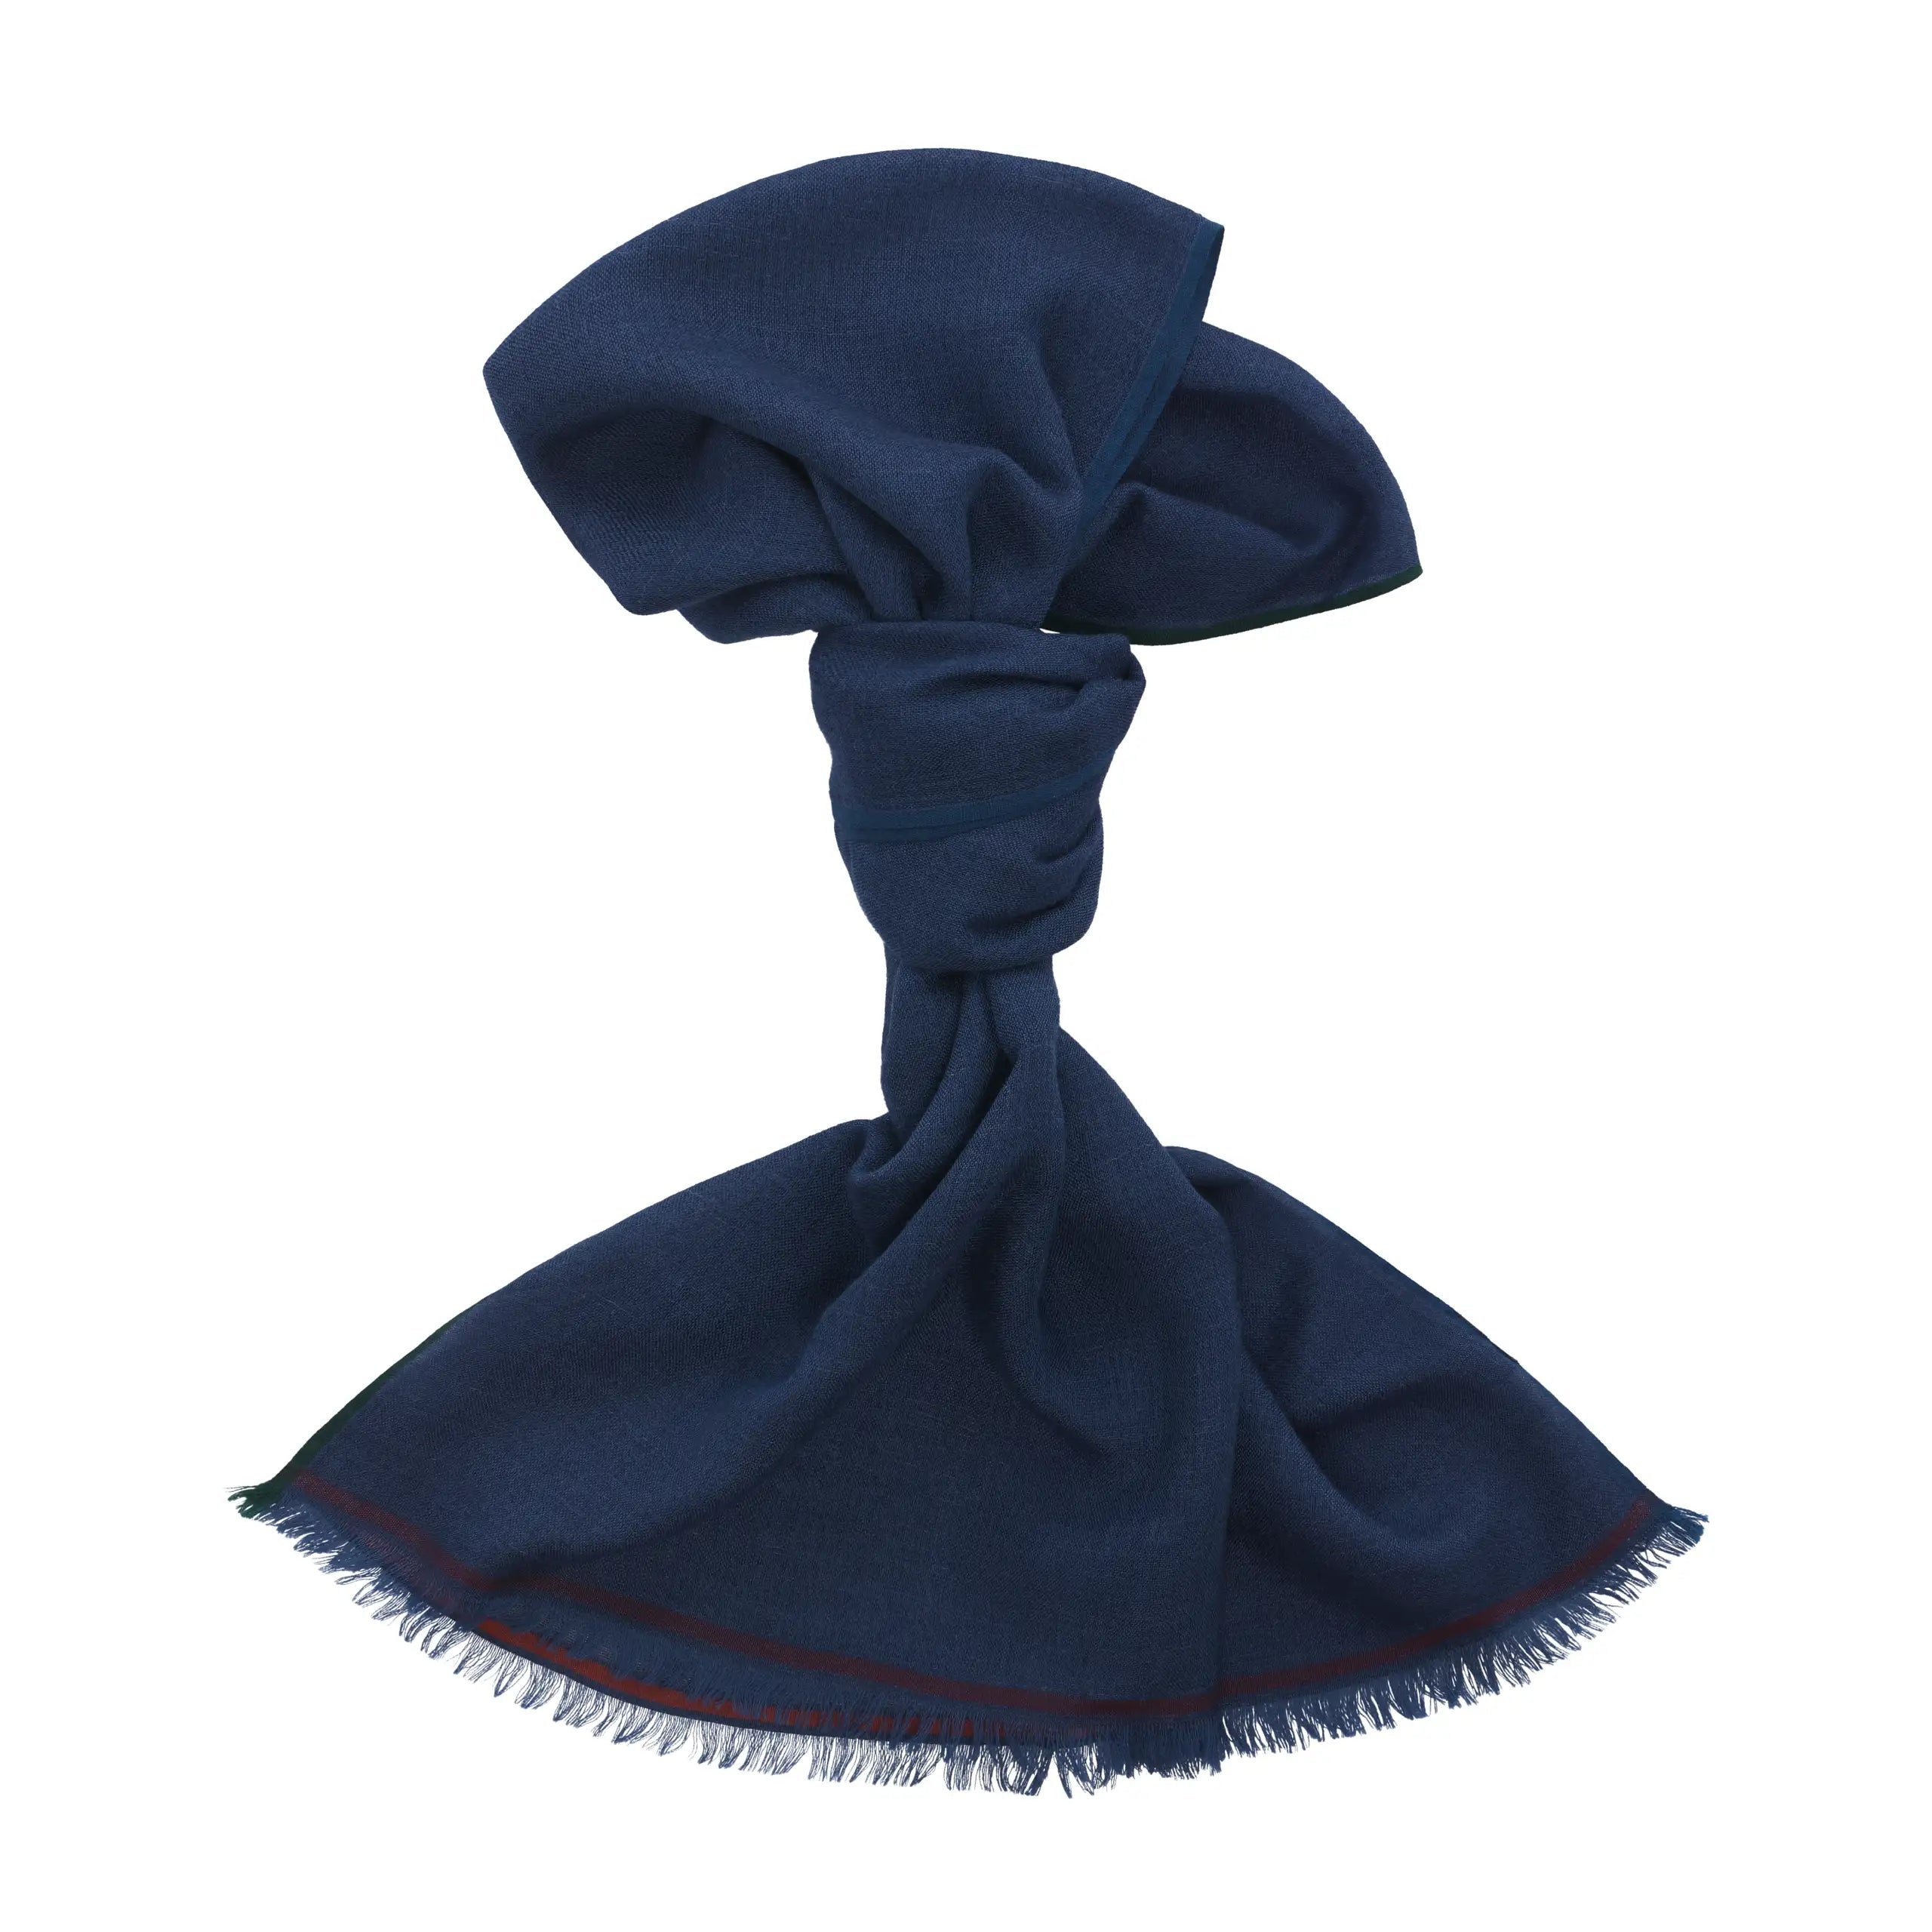 Cashmere-Blend Scarf in Navy Blue